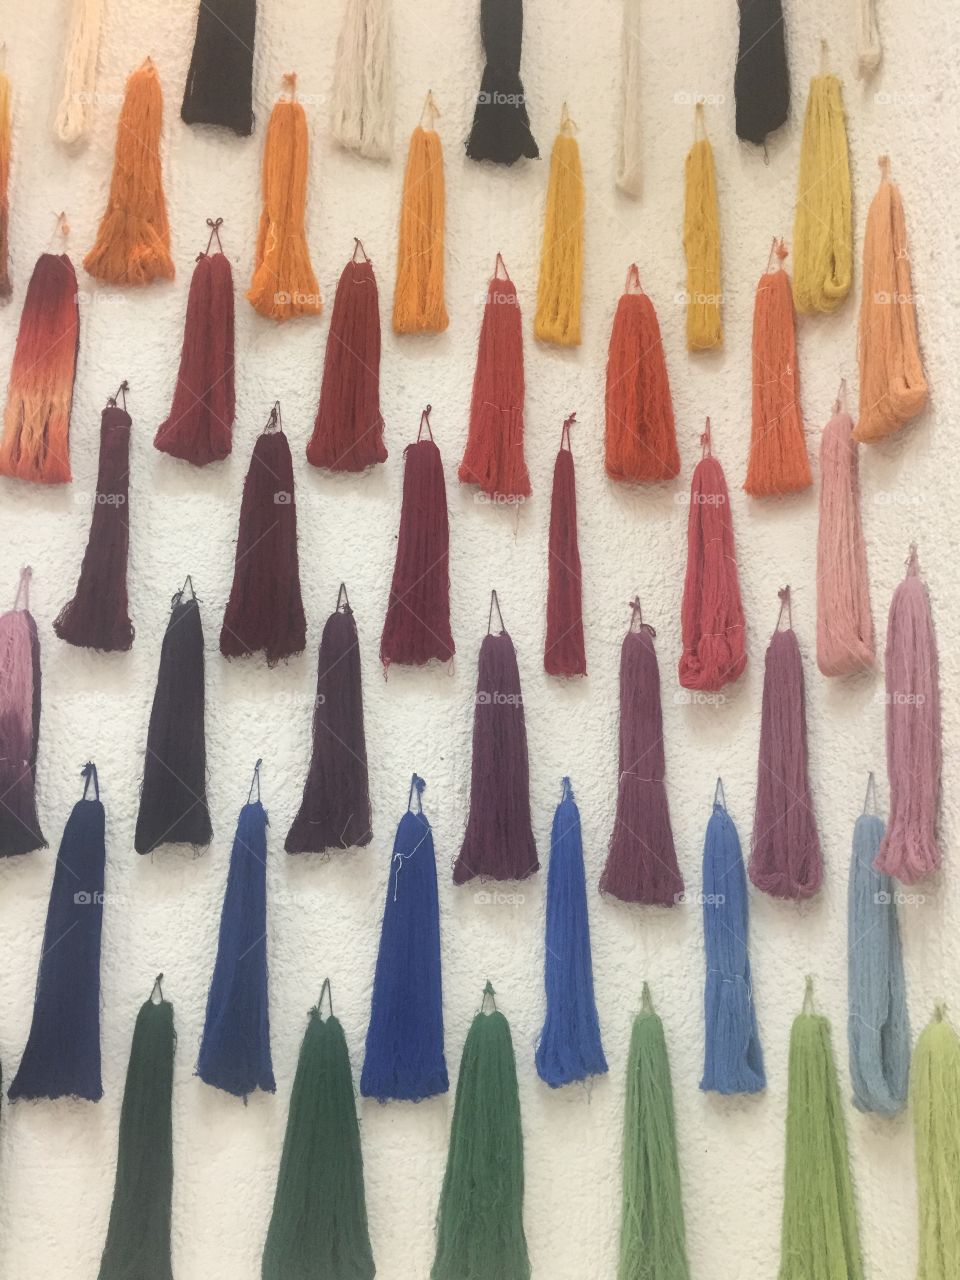 Samples of naturally dyed thread